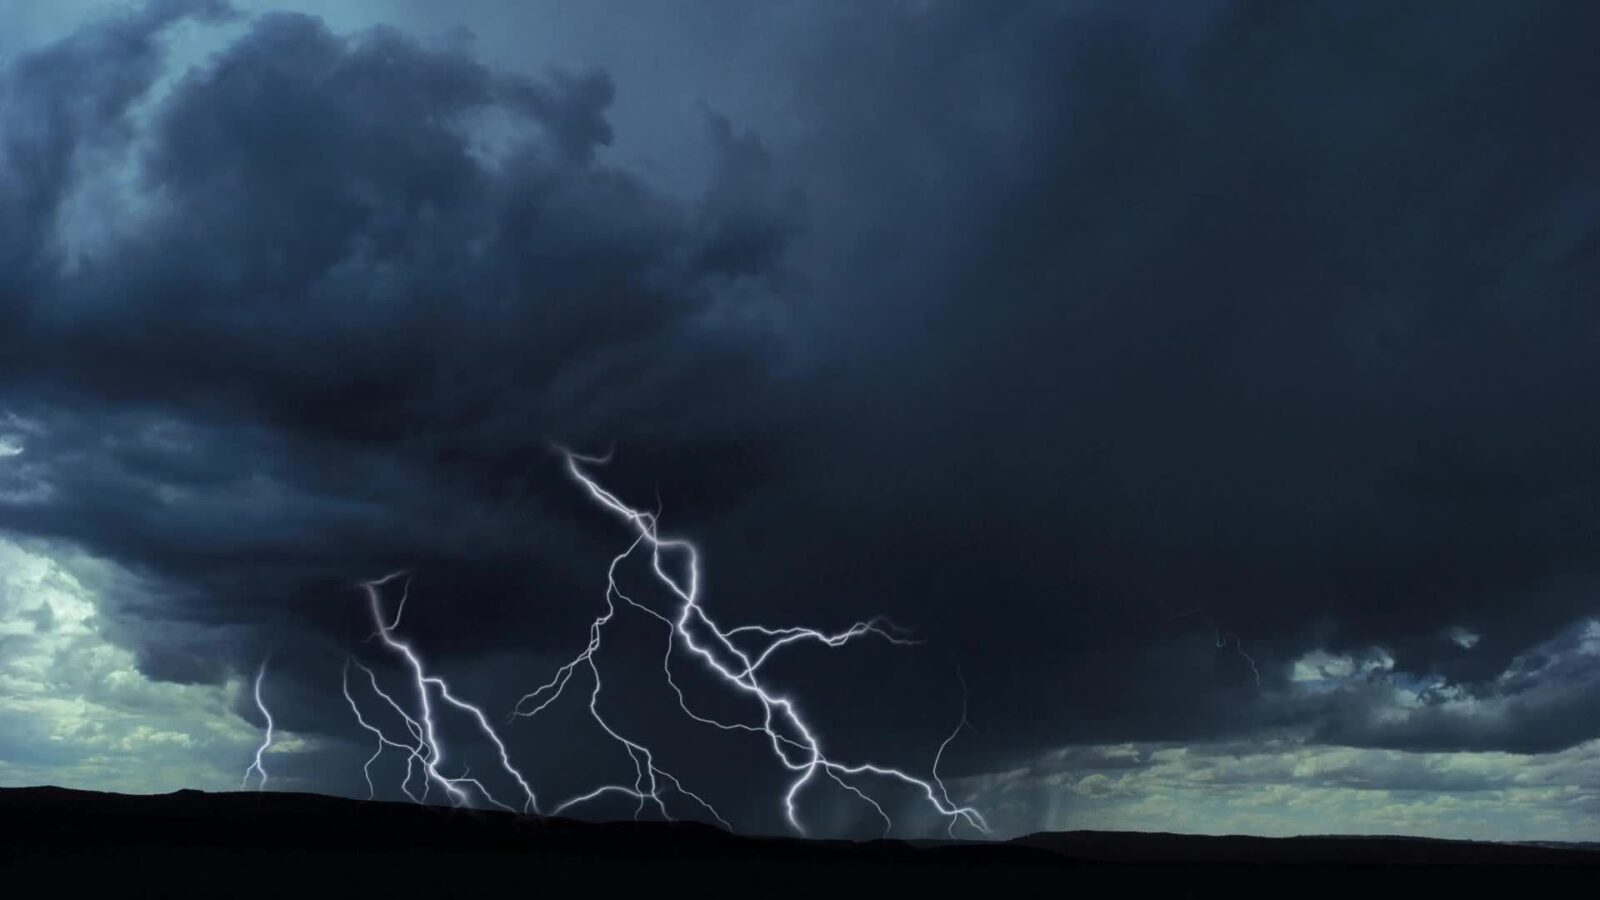 LiveWallpapers4Free.com | Thunderstorm Clouds Nature - Free Live Wallpaper